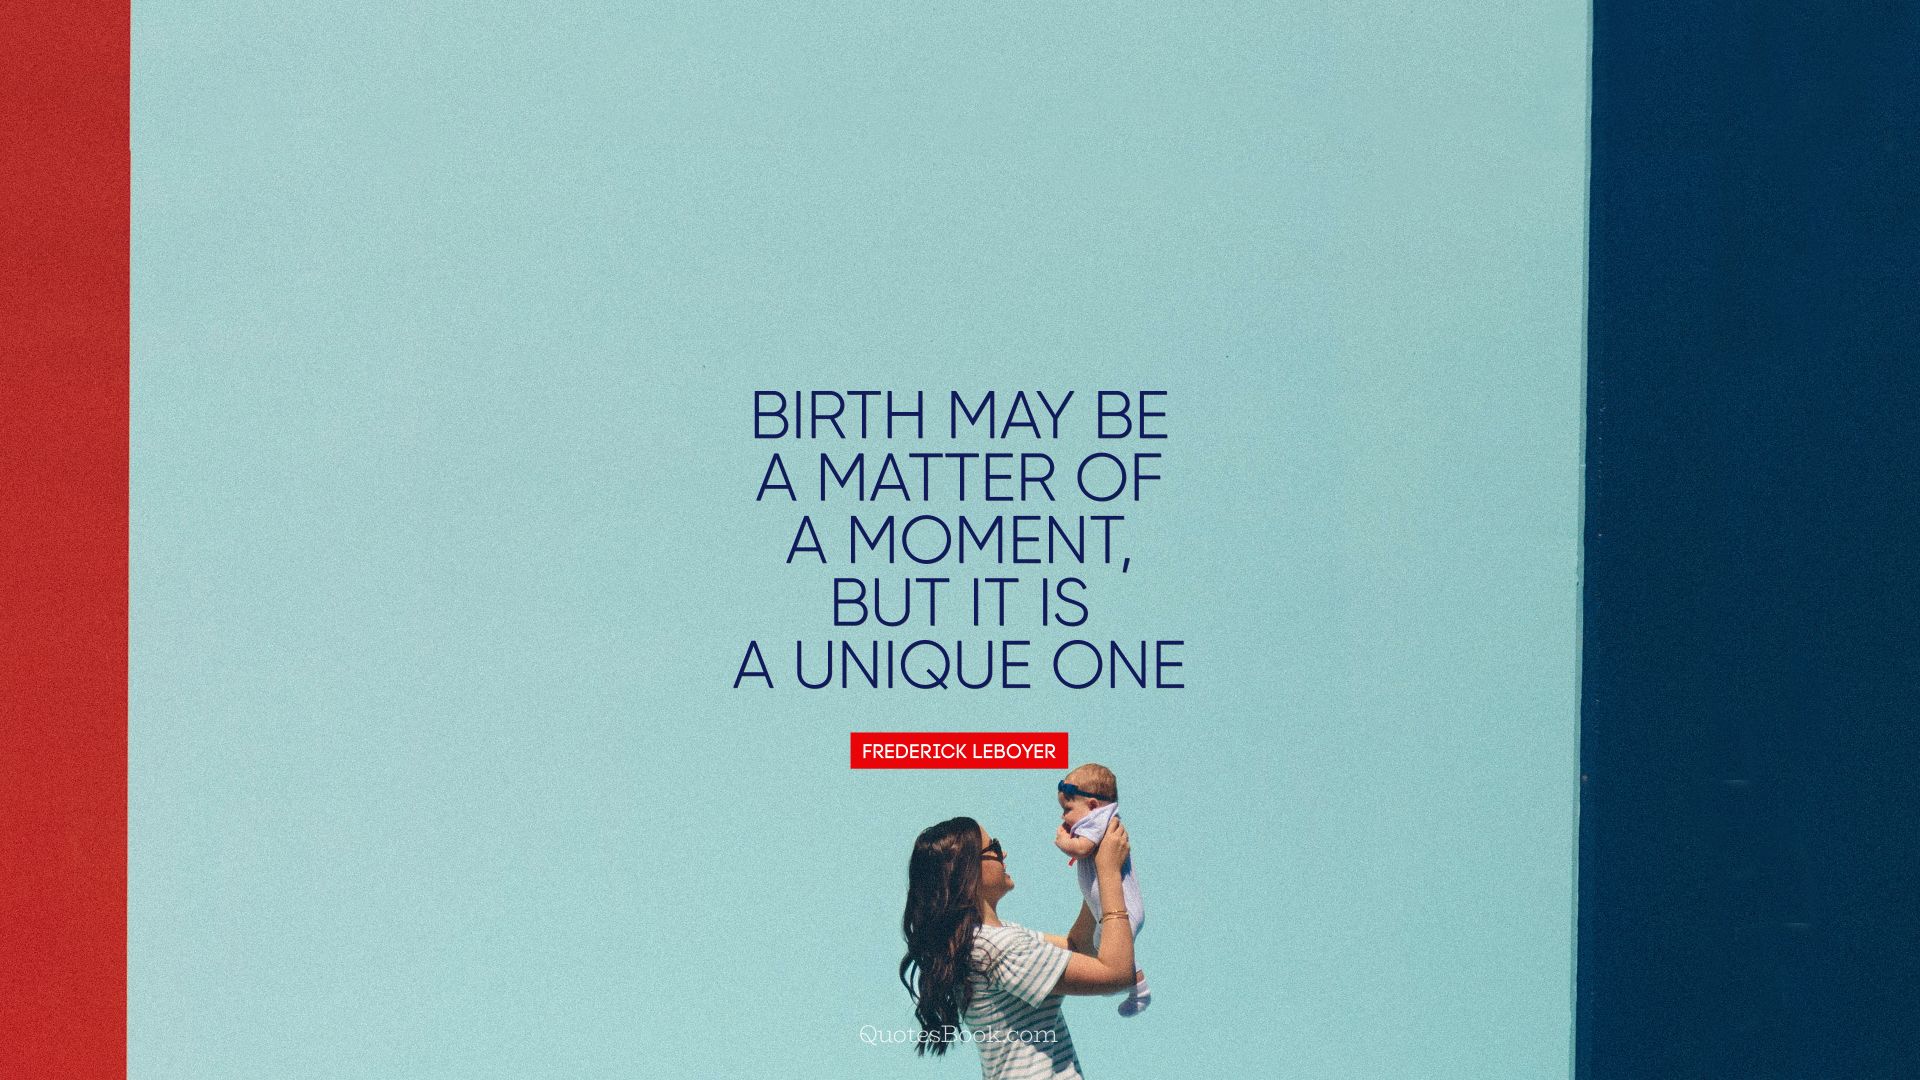 Birth may be a matter of a moment, but it is a unique one. - Quote by Frédérick Leboyer